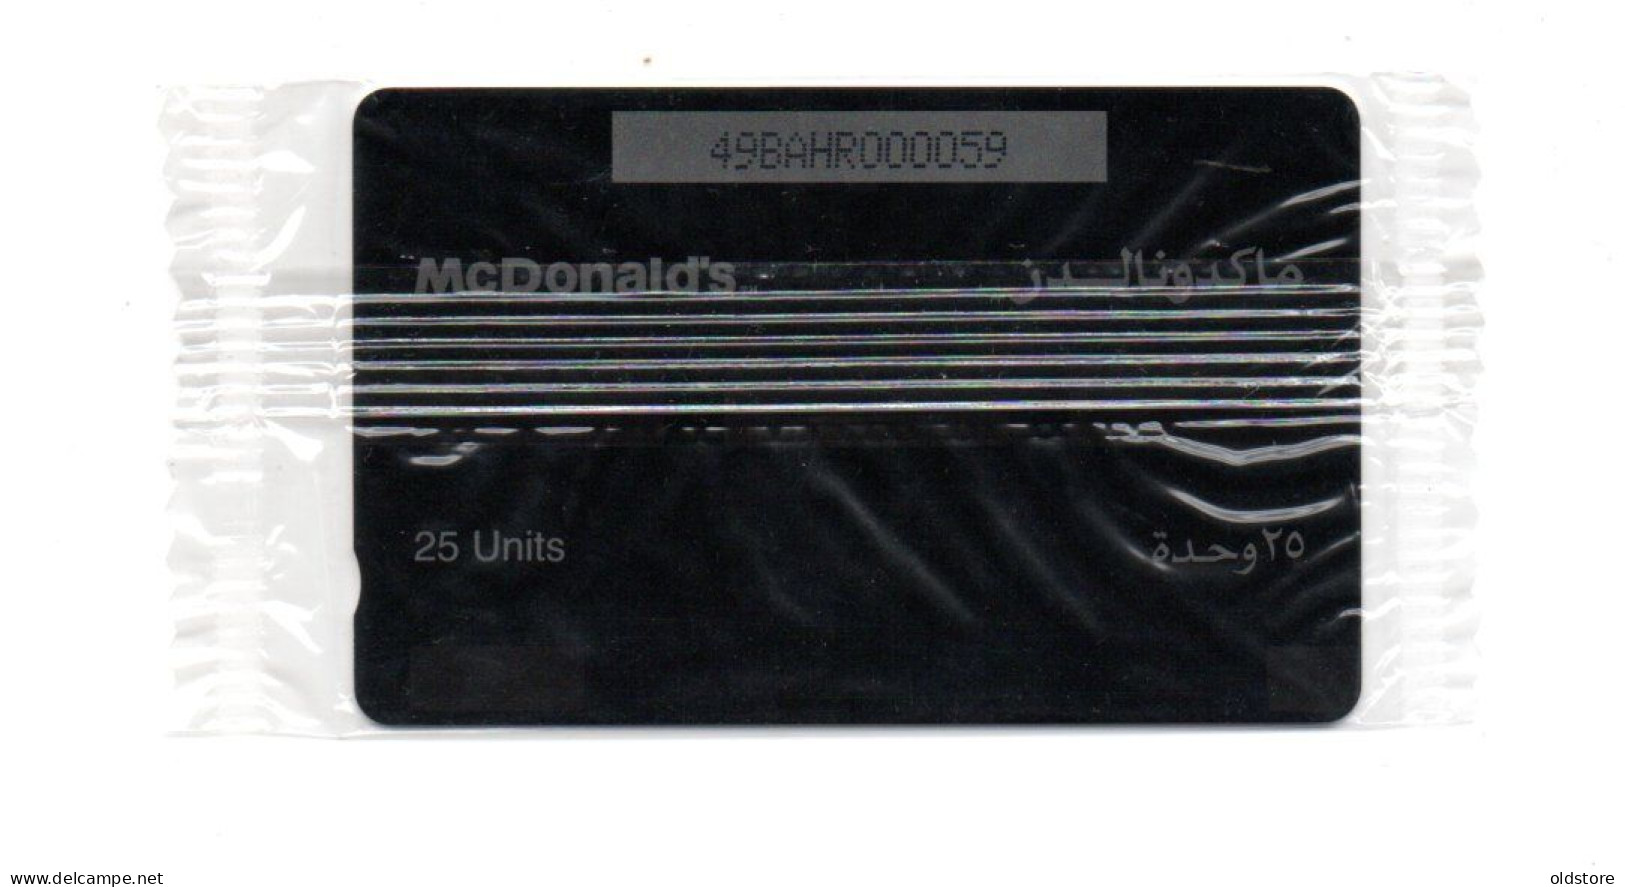 Bahrain Phonecards - Bahrain McDonald's Restaurant Offer Card Mint With Low Serial Number 000059  - Batelco -  ND 2001 - Bahrein